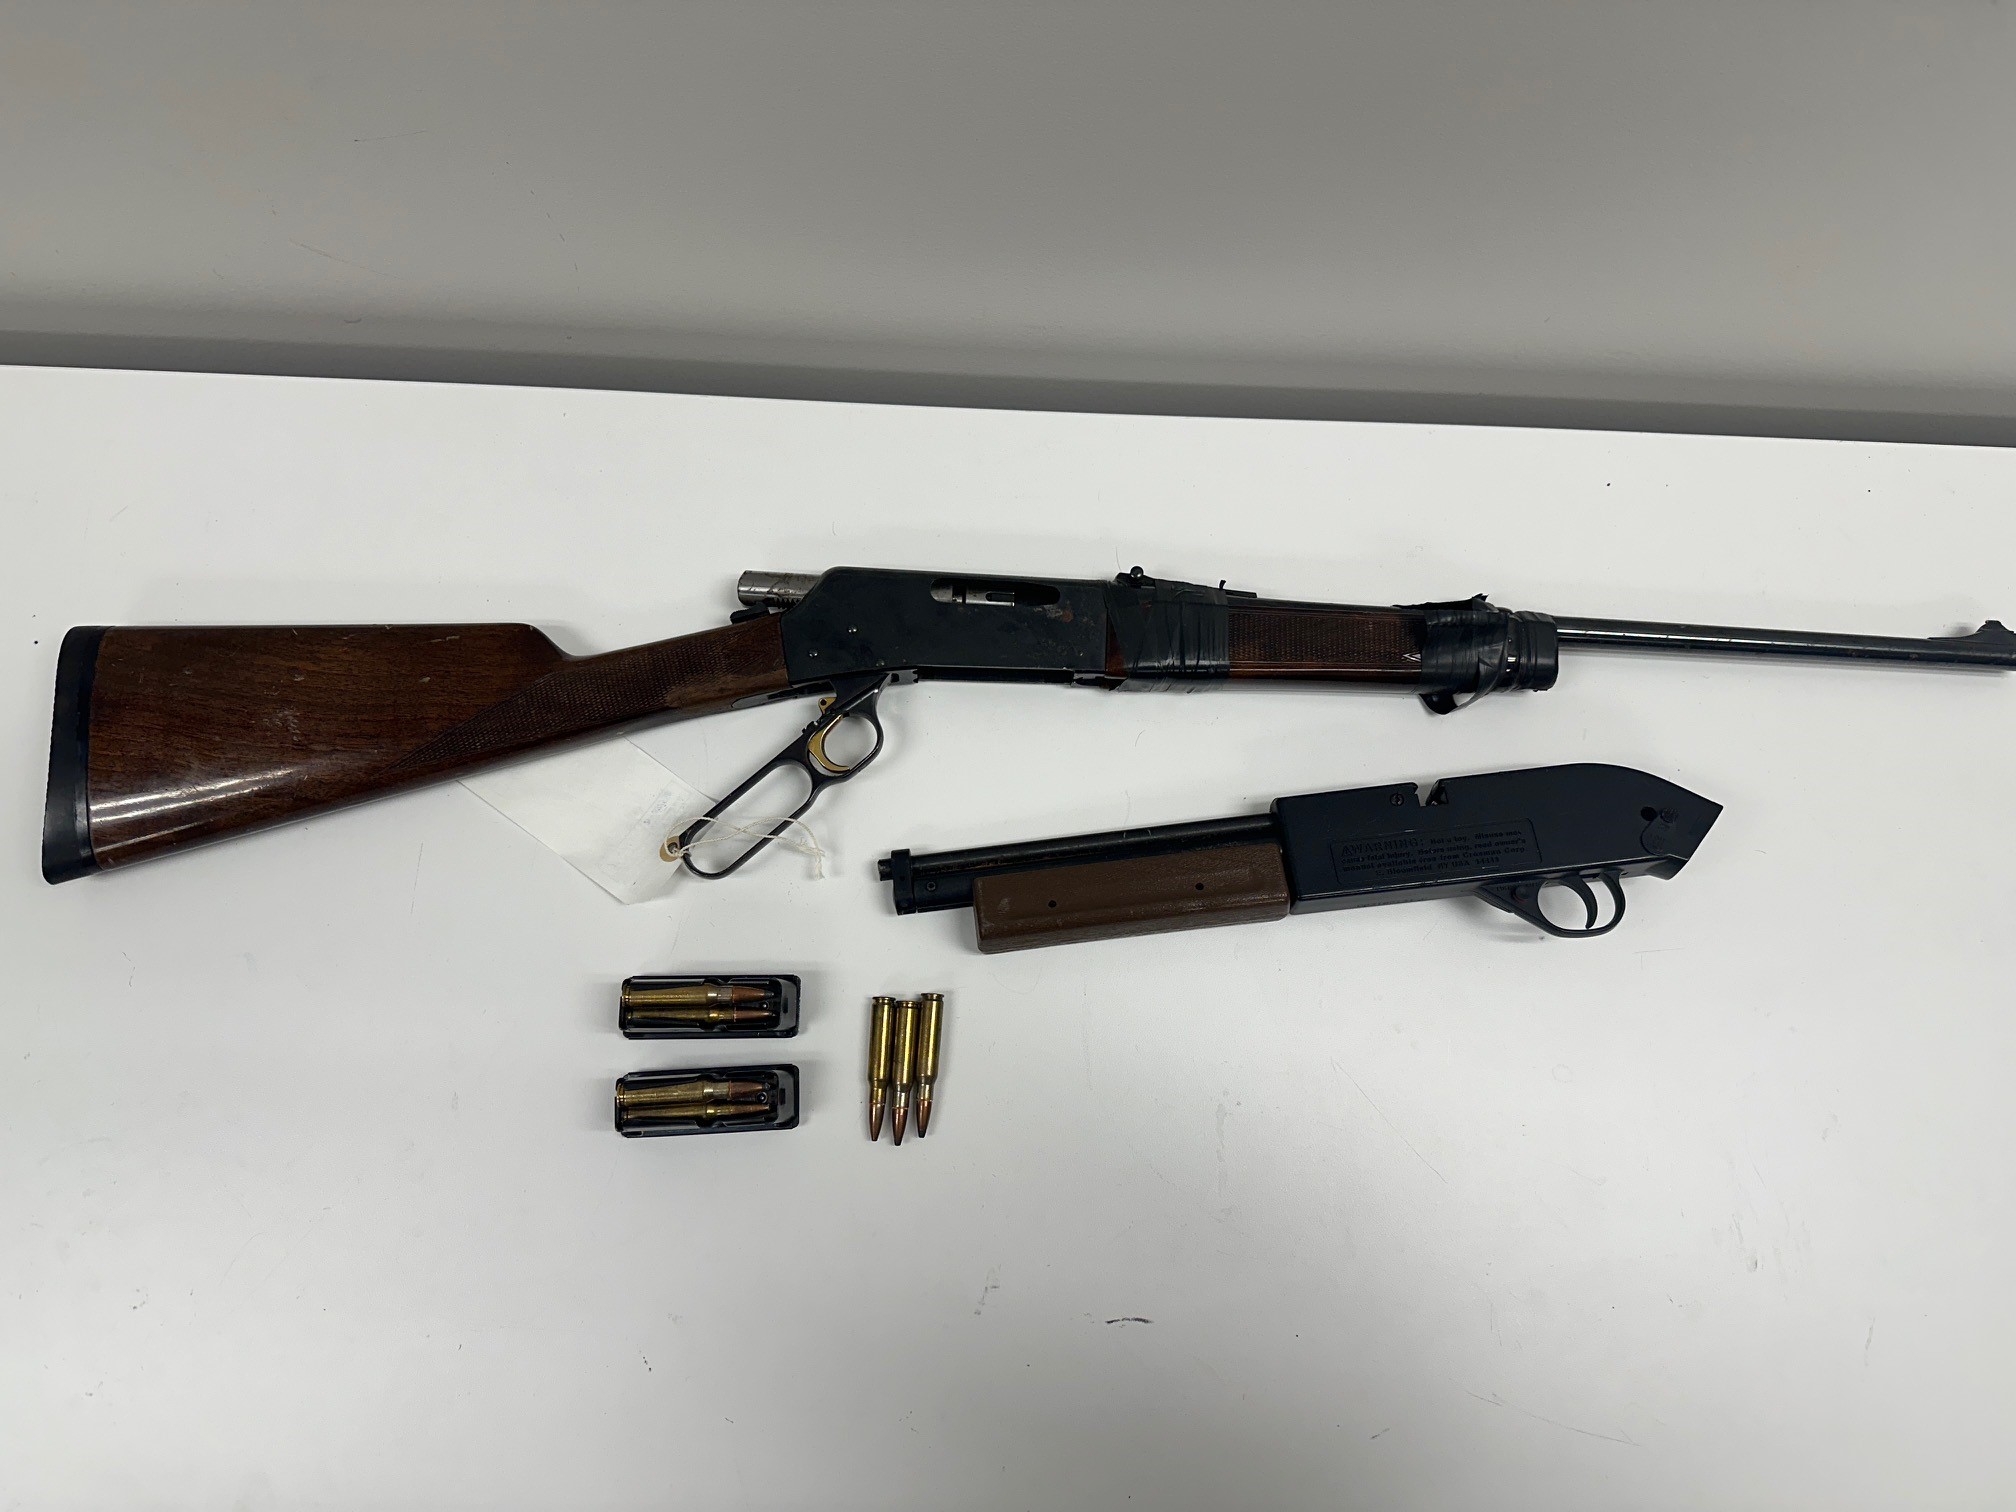 RCMP arrest man in connection with firearm incident in Manitoba community